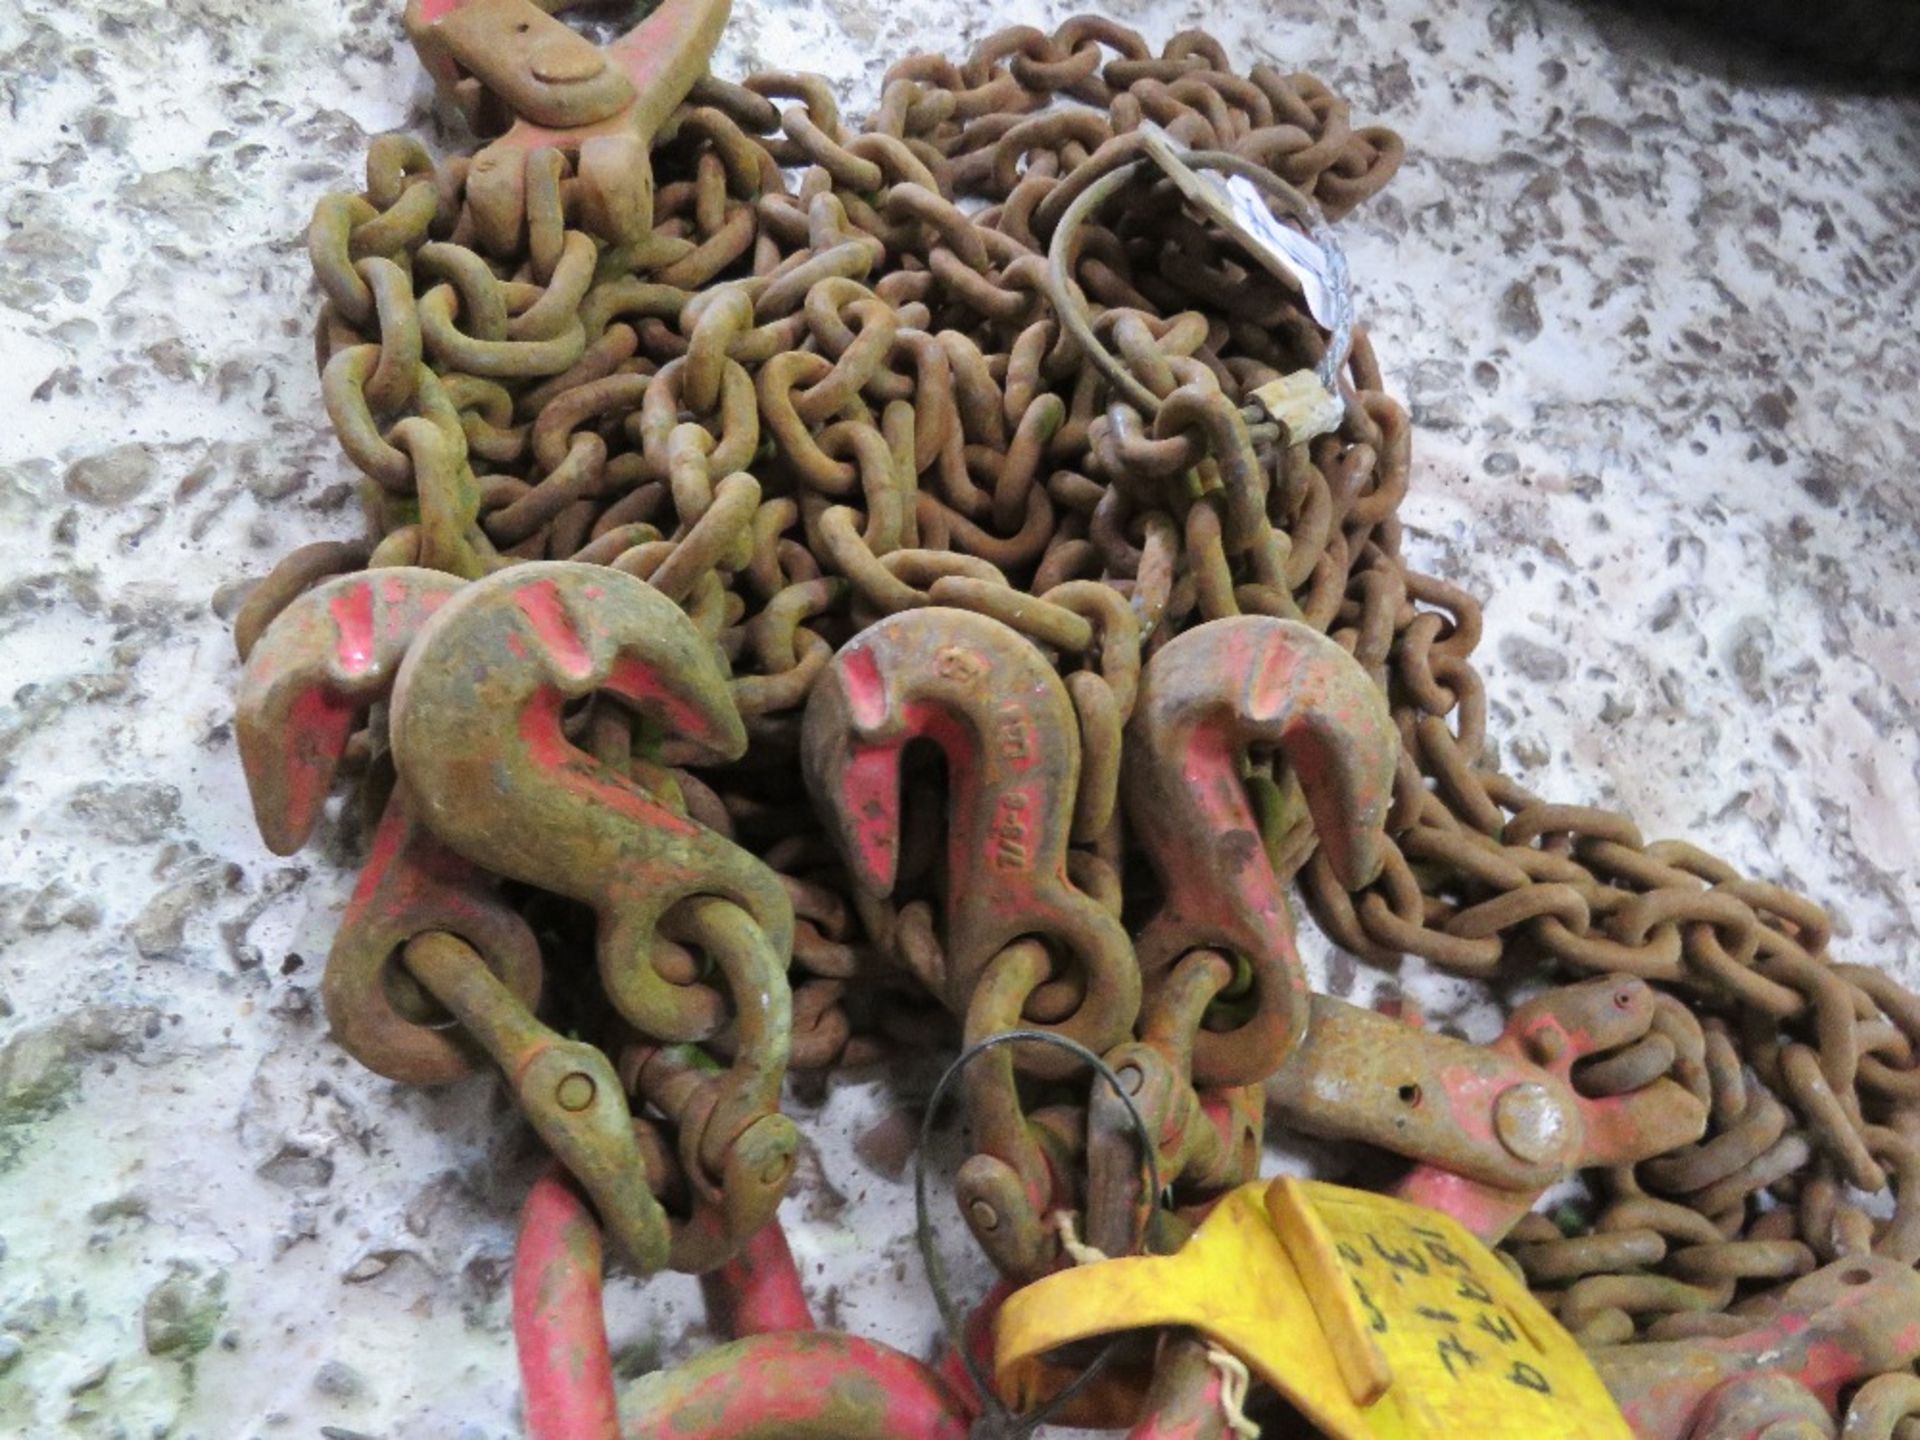 4 LEGGED LIFTING CHAINS WITH SHORTENERS, 9FT OVERALL LENGTH APPROX. - Image 3 of 3